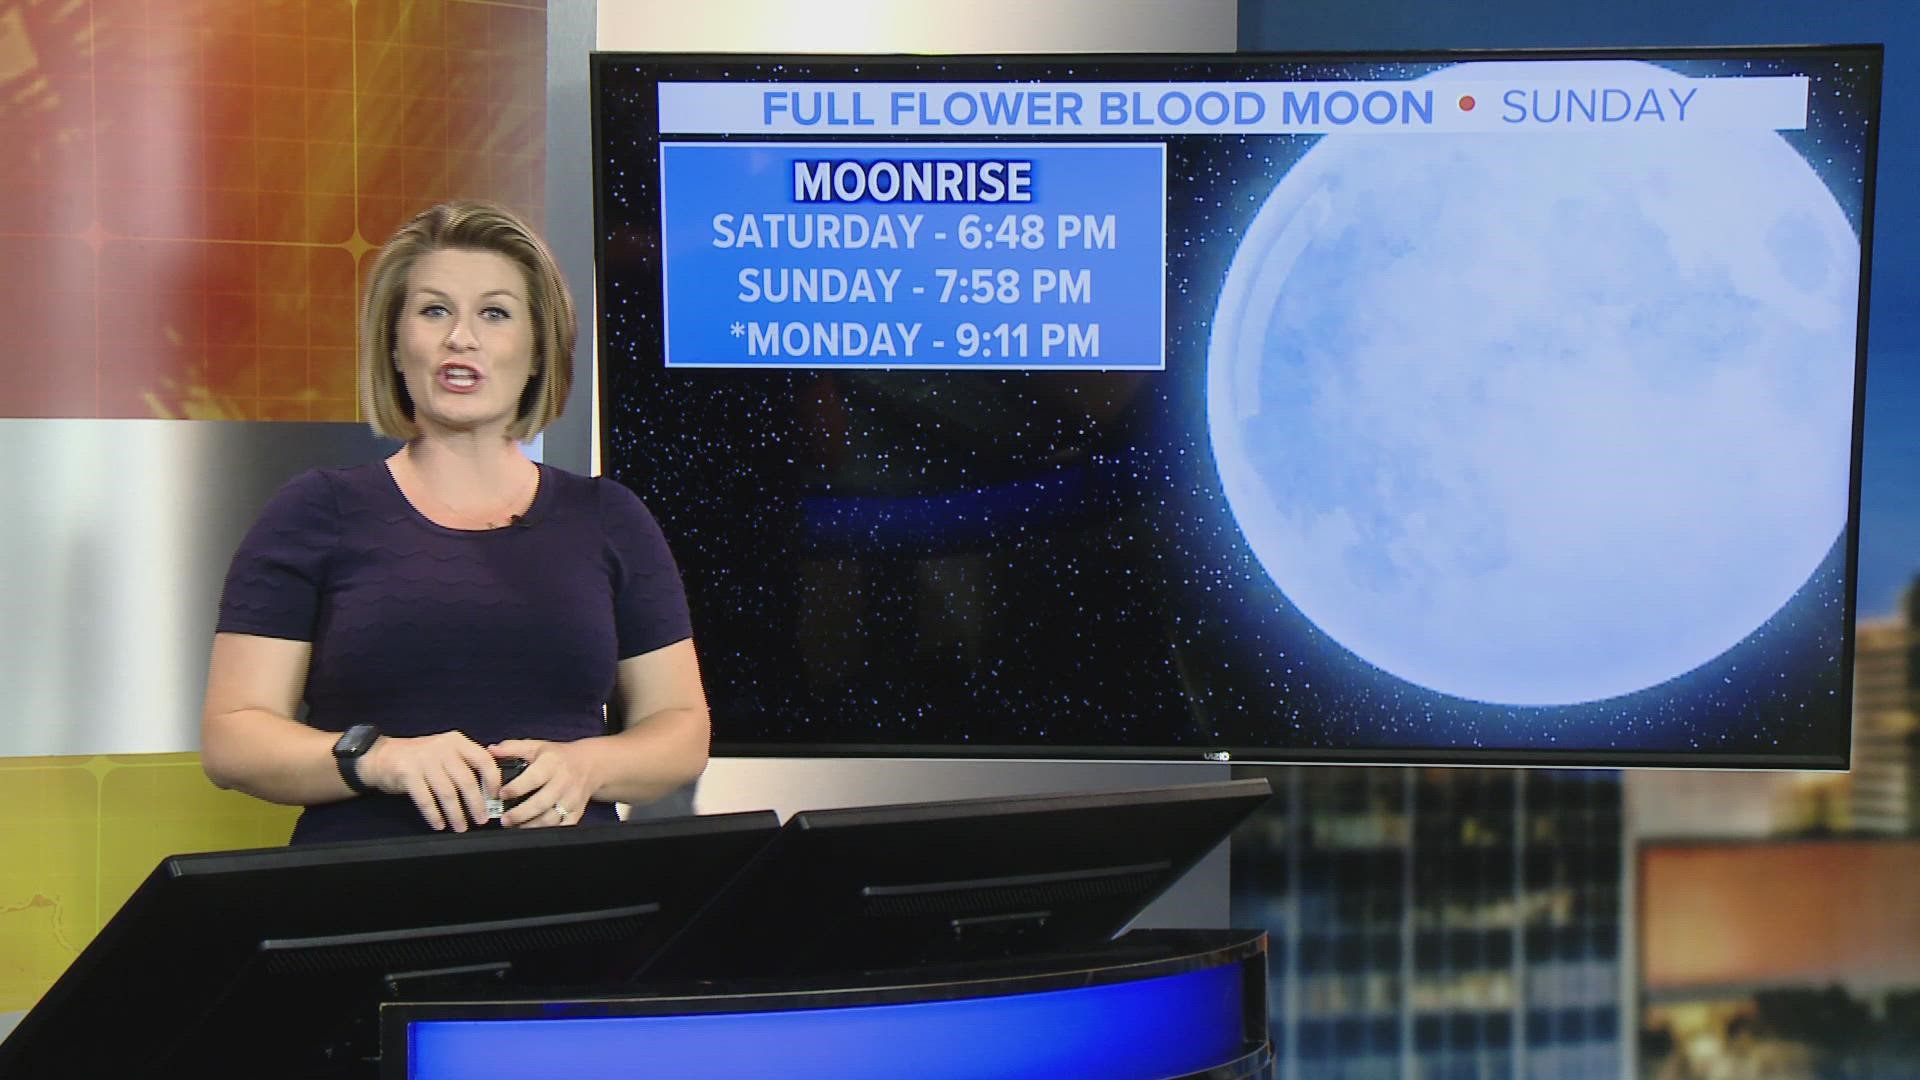 Earth's shadow will cast a brilliant red hue on May's Flower Moon, or blood moon, during a total lunar eclipse that also happens to be a "super moon."